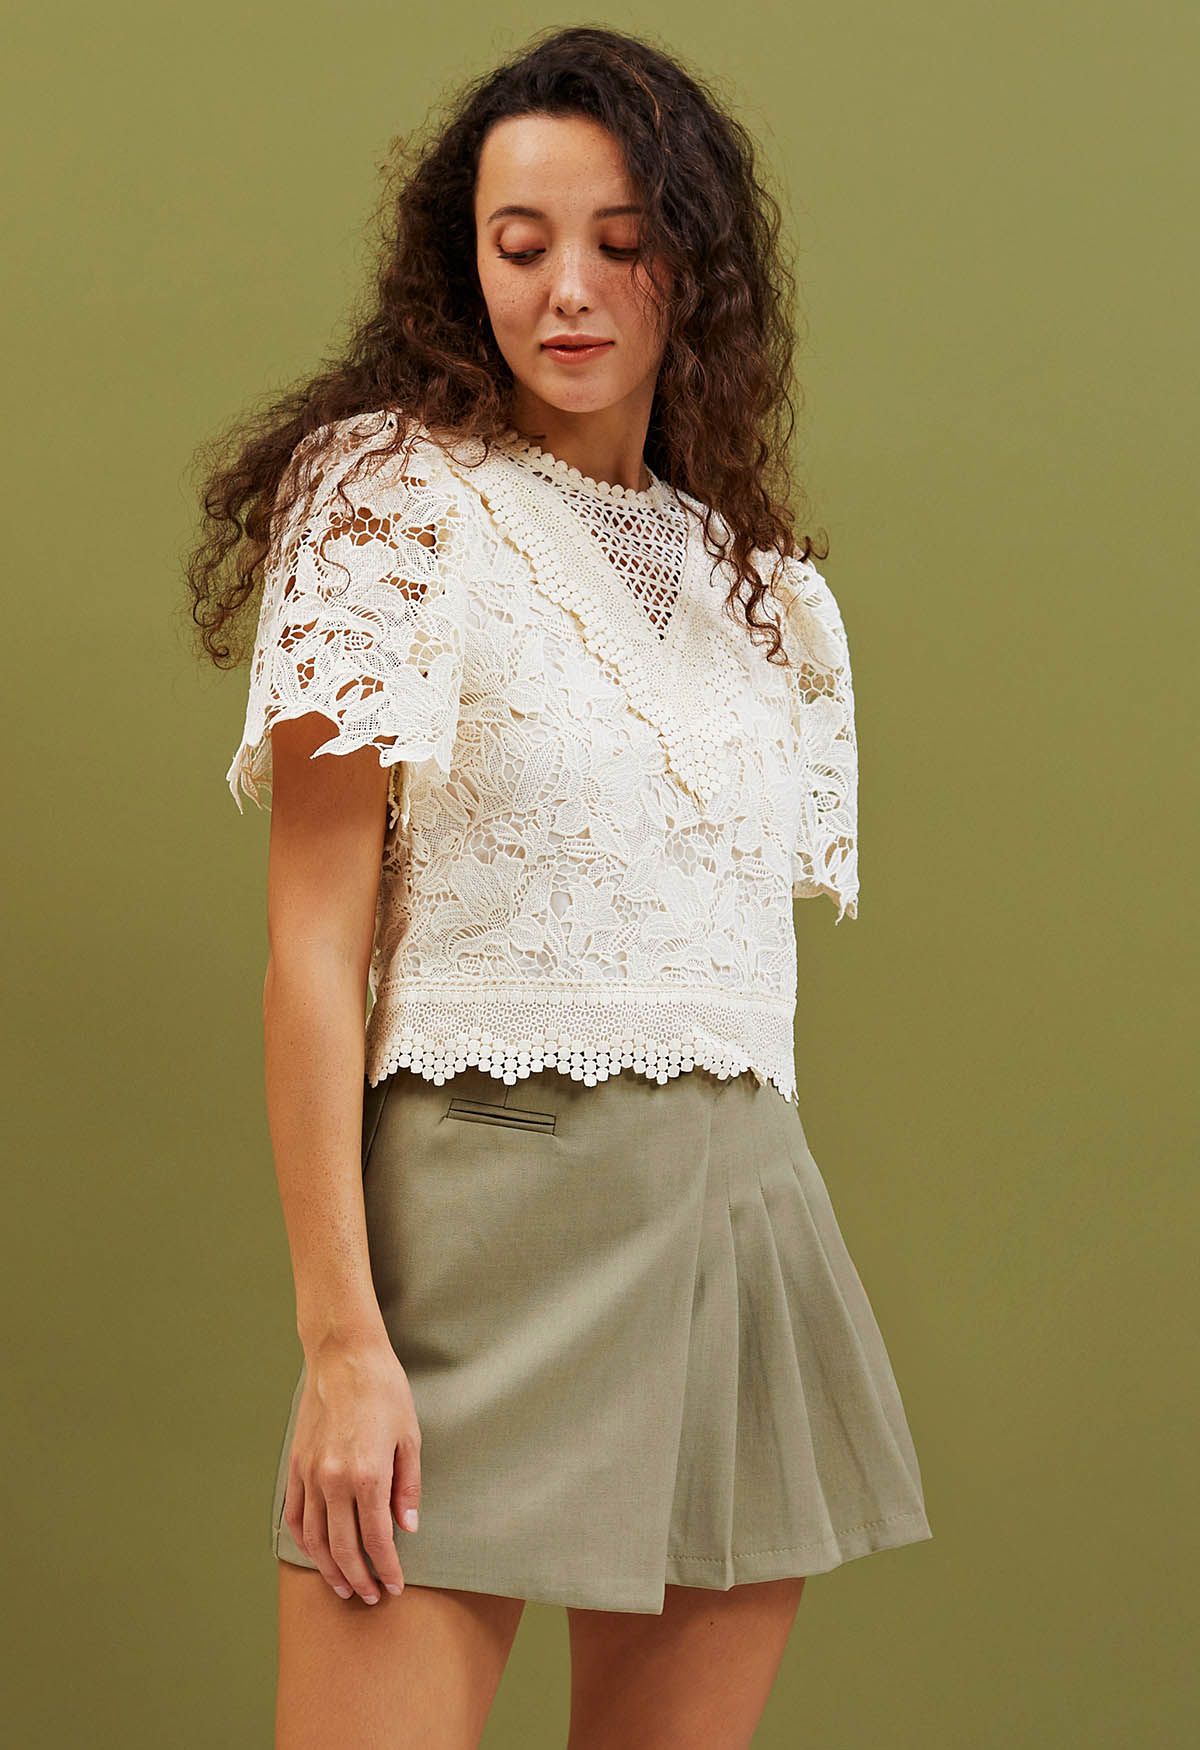 Lily Crochet Lace Crop Top in Cream - Retro, Indie and Unique Fashion